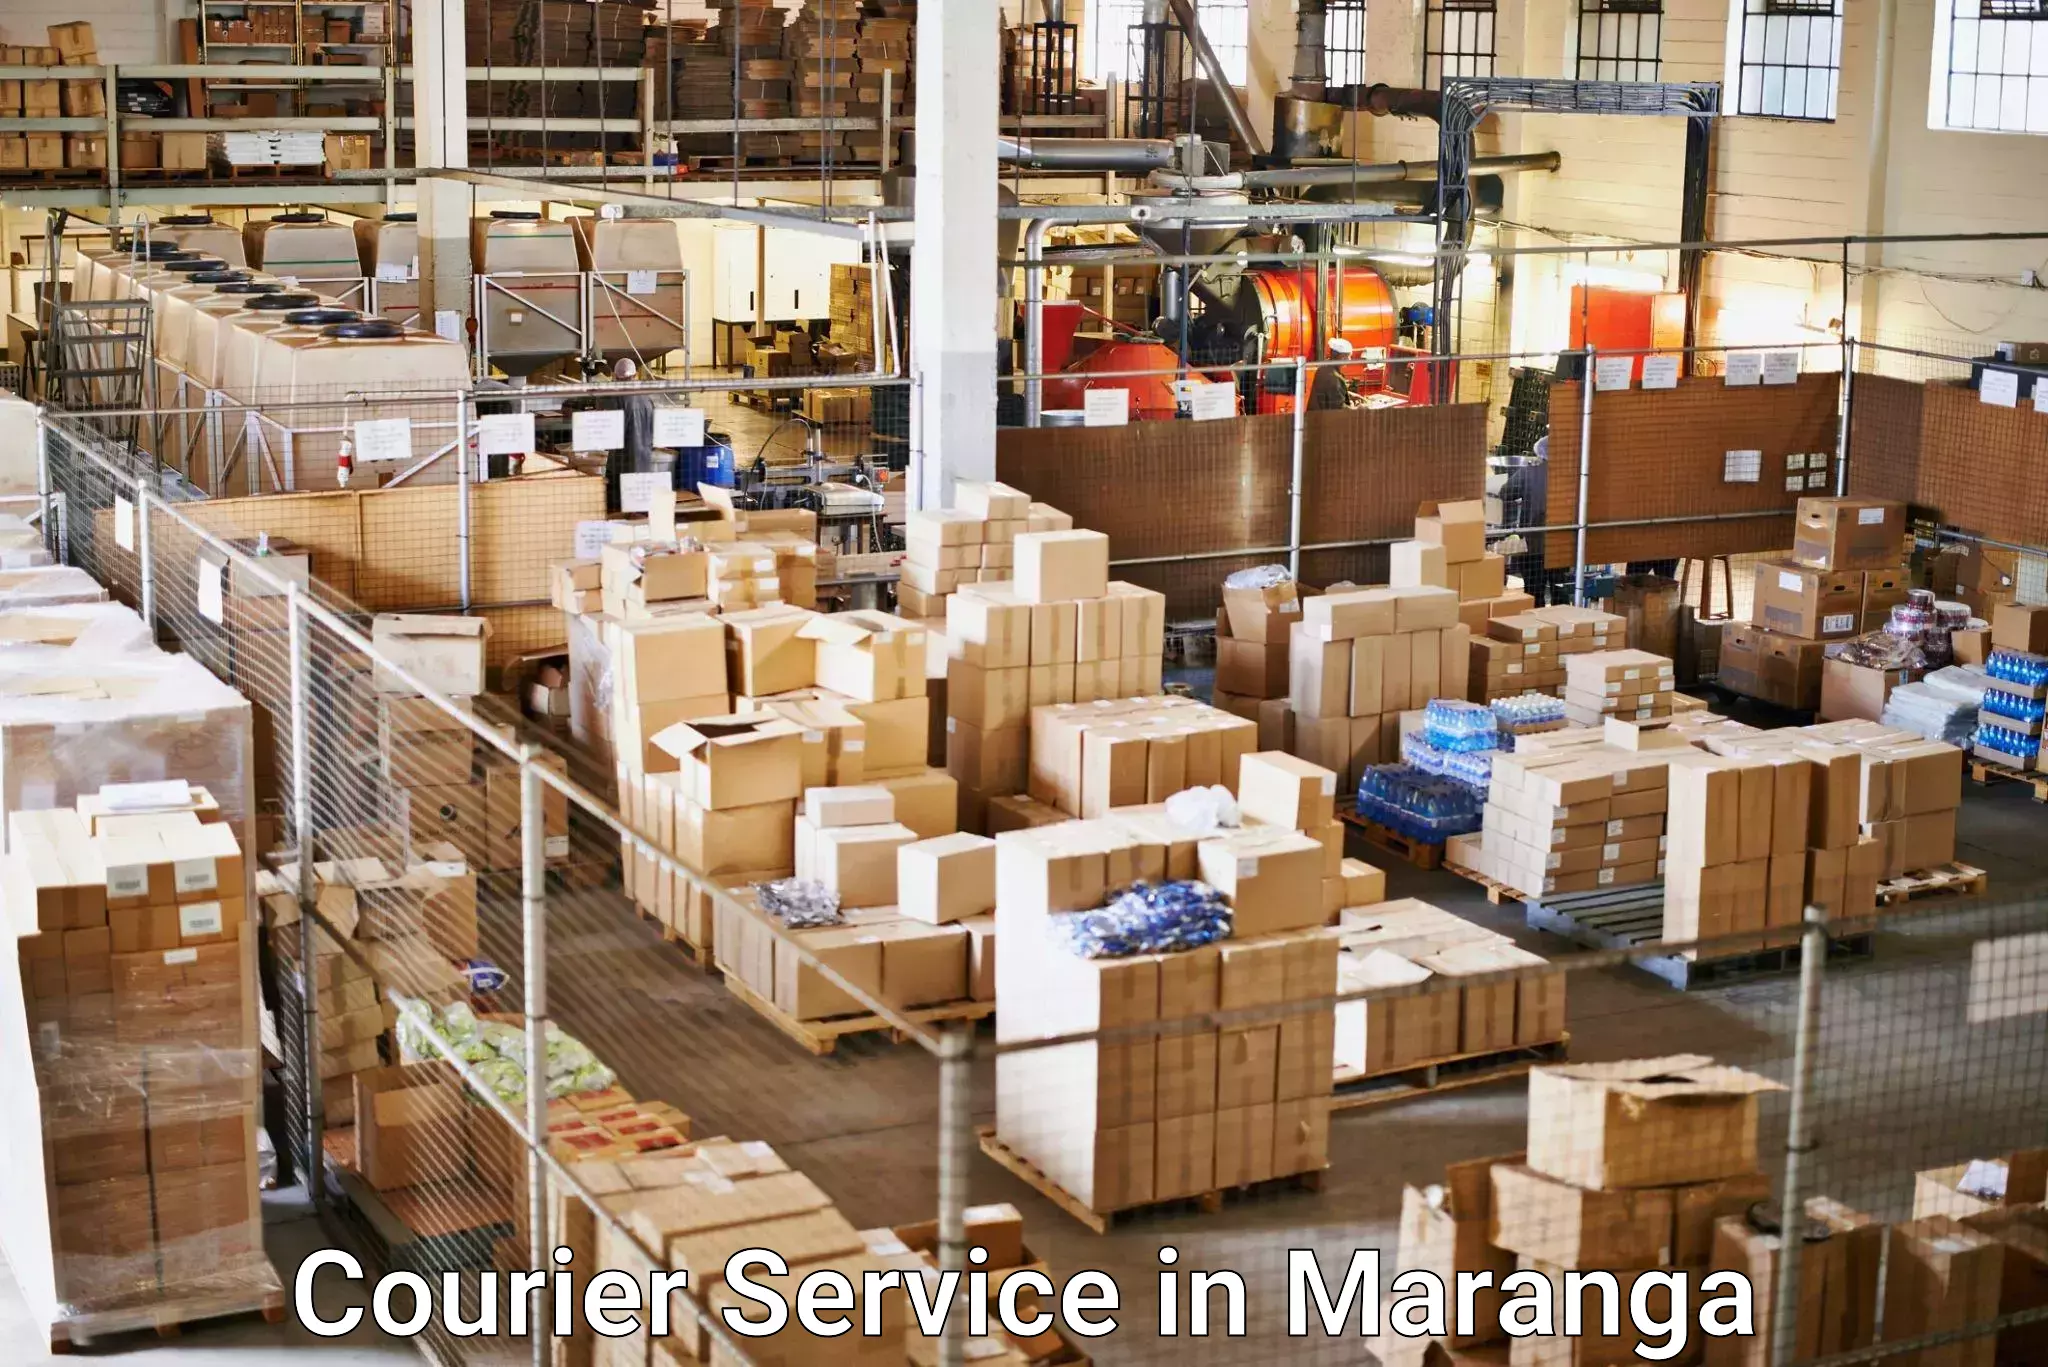 Fast-track shipping solutions in Maranga